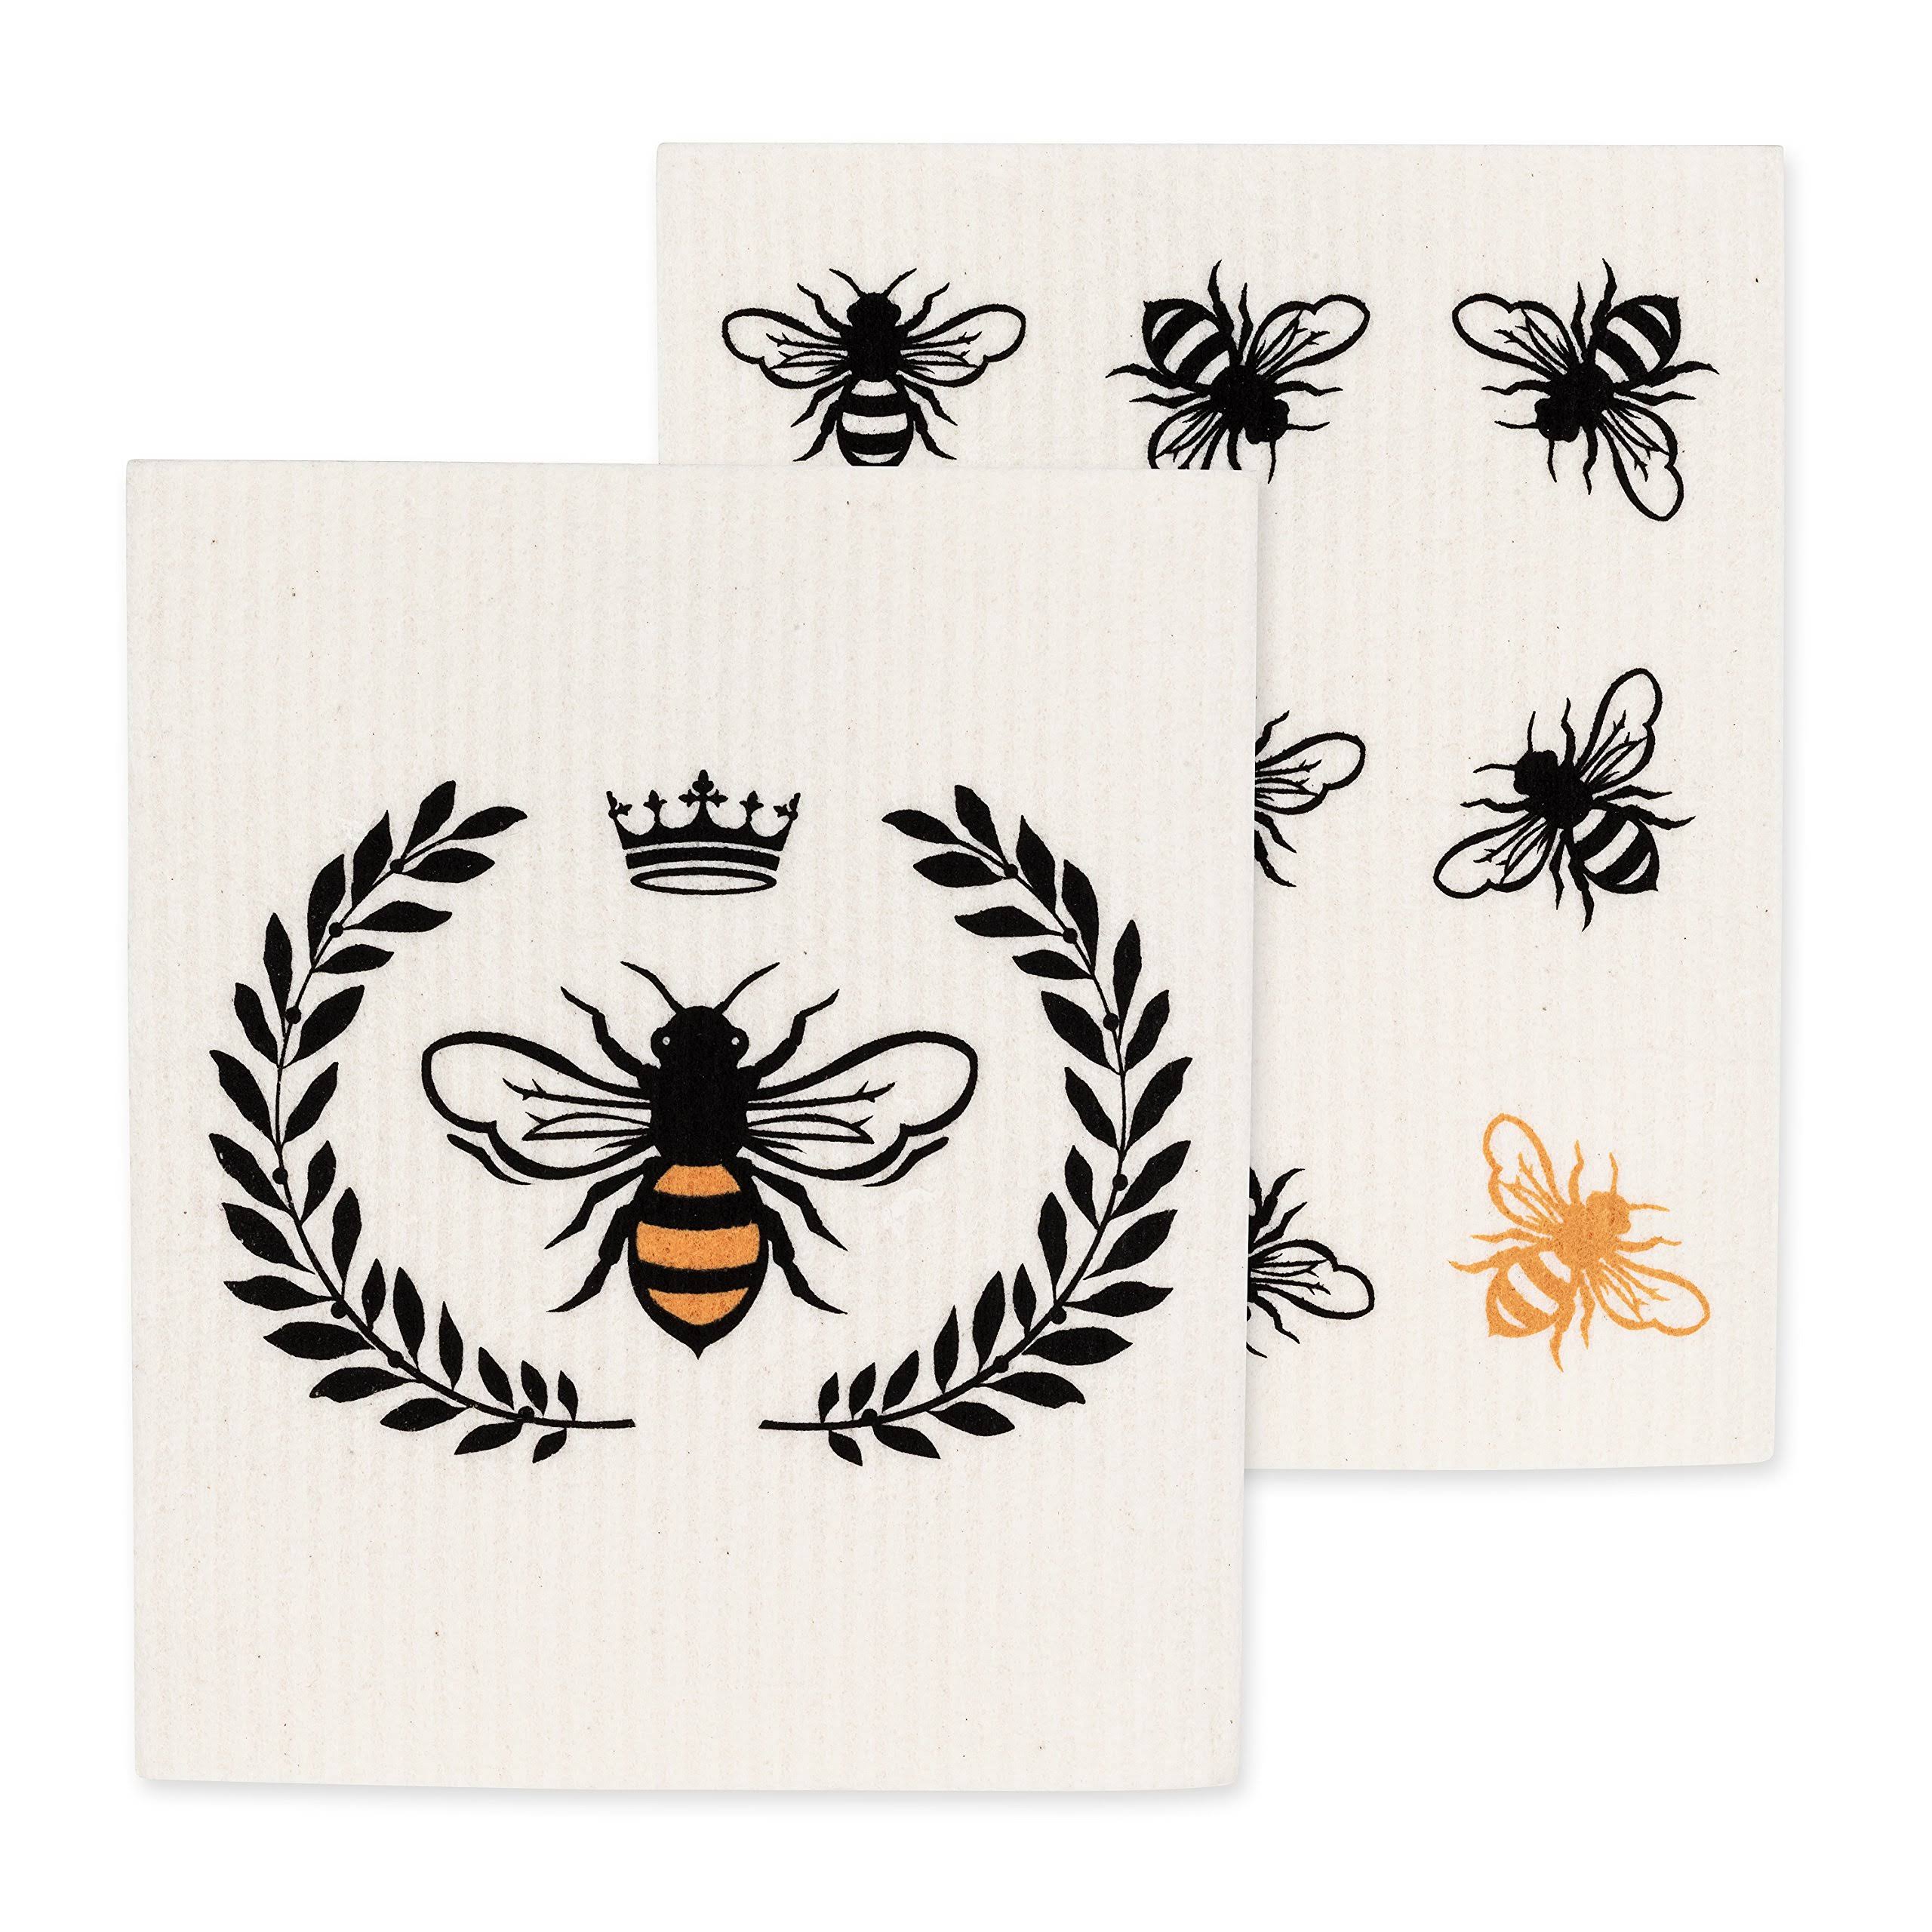 Abbott COLLECTIONS AB-84-ASD-AB-11 6.5 x 8 in. Bee Dishcloths, Ivory & Black - Set of 2